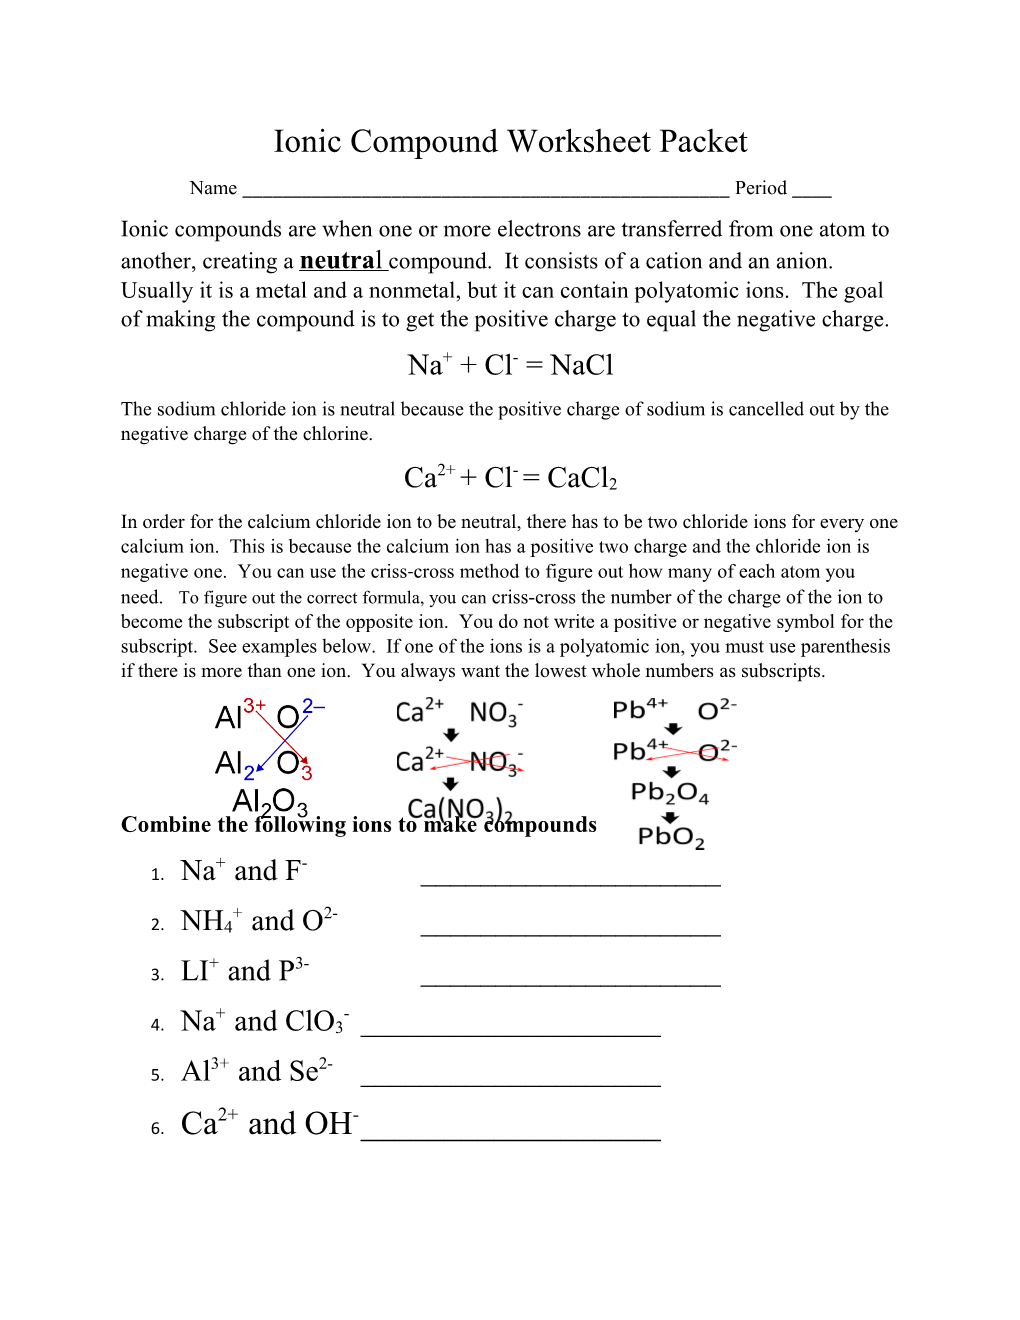 Ionic Compound Worksheet Packet